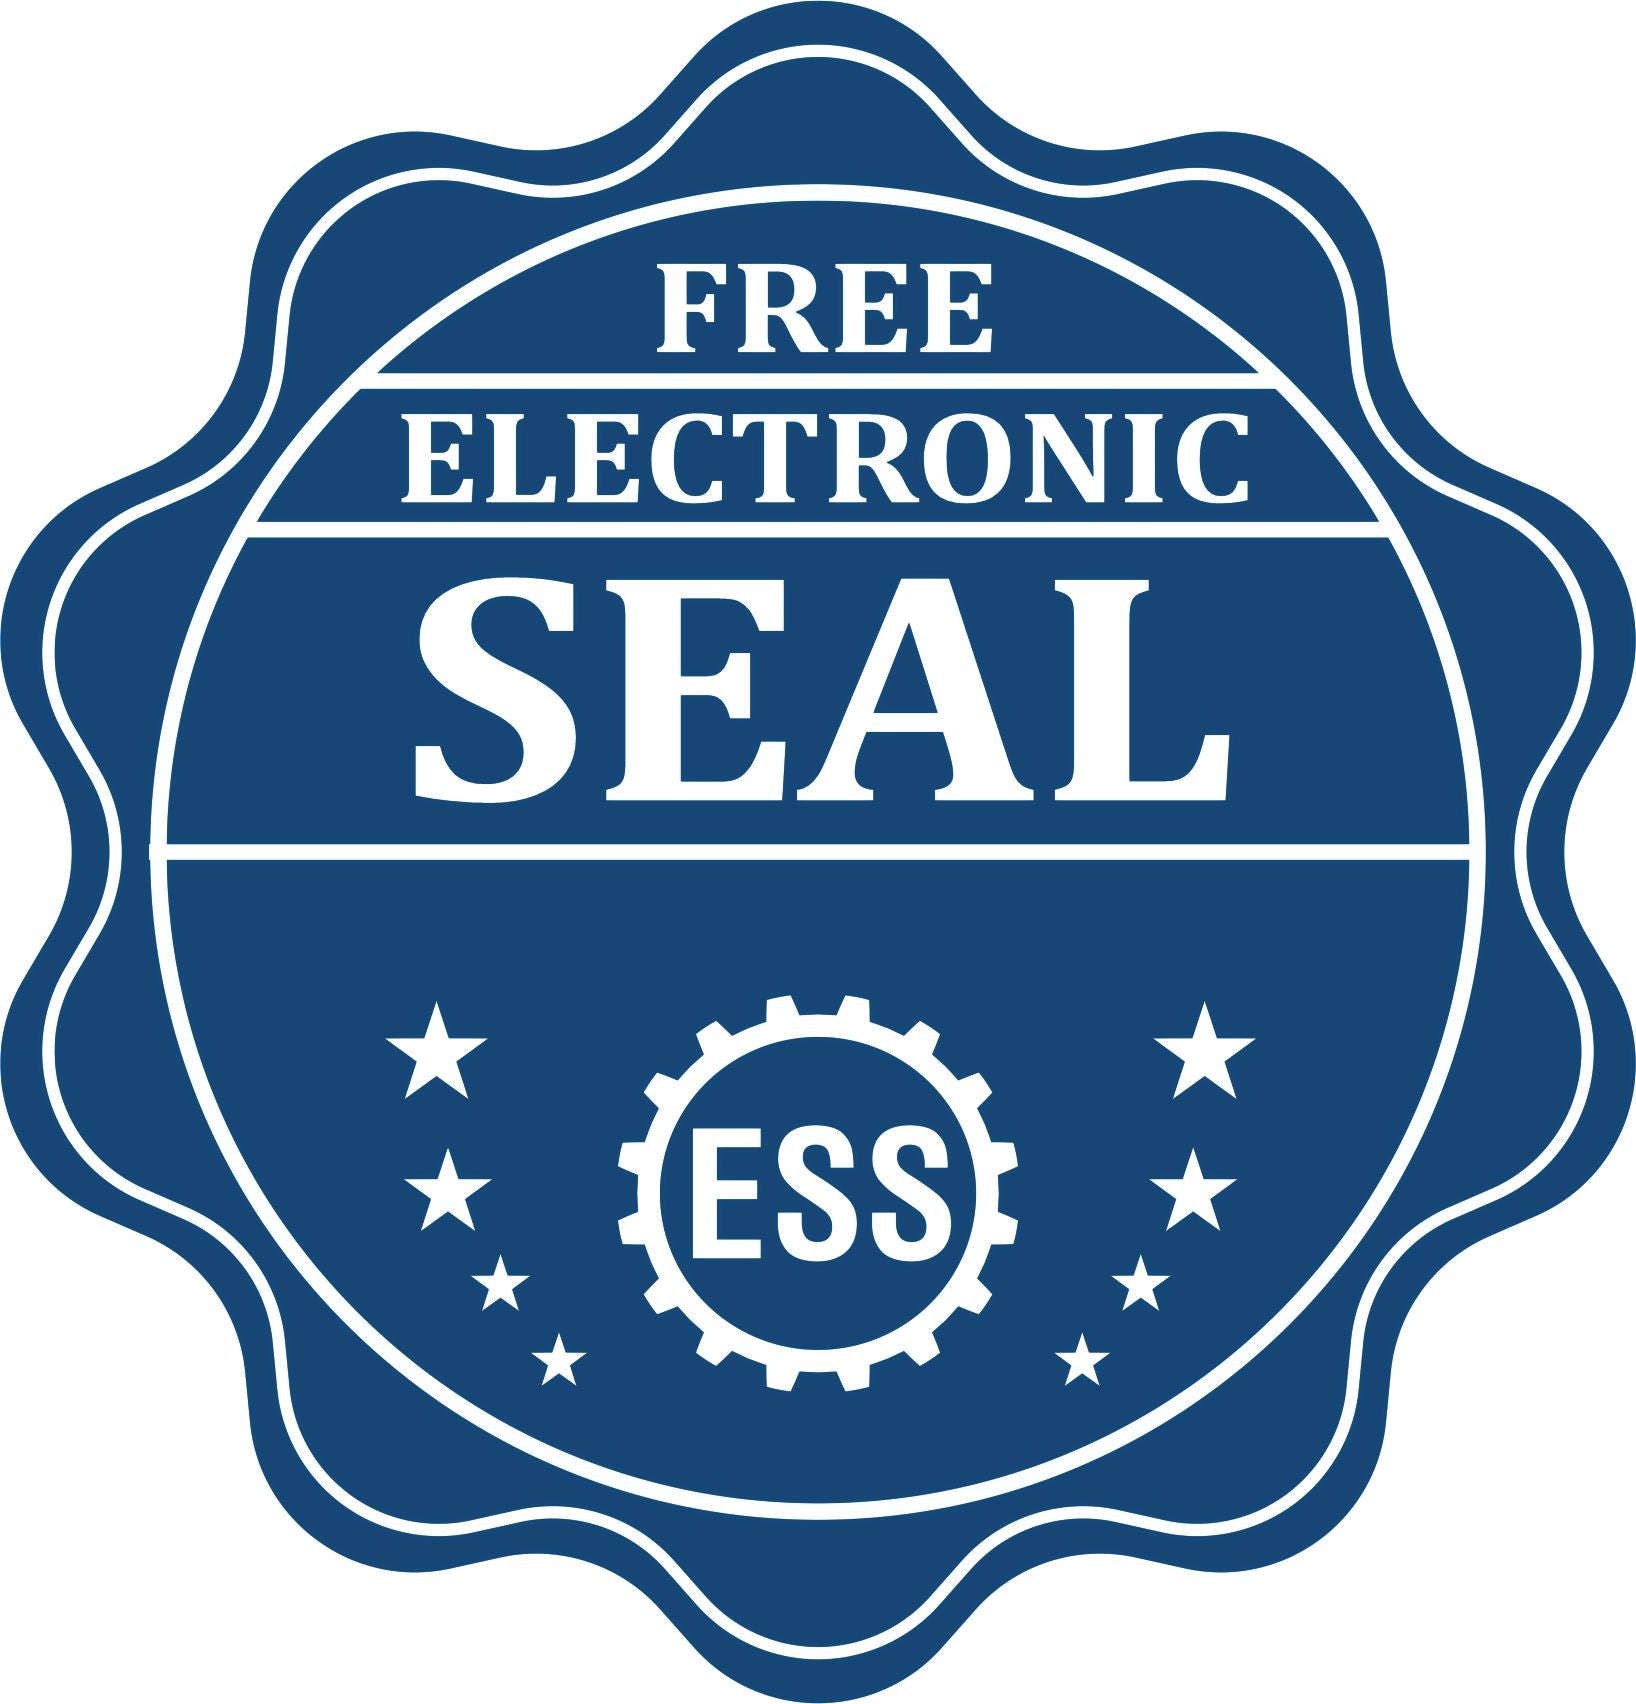 A badge showing a free electronic seal for the Hybrid Alabama Land Surveyor Seal with stars and the ESS gear on the emblem.